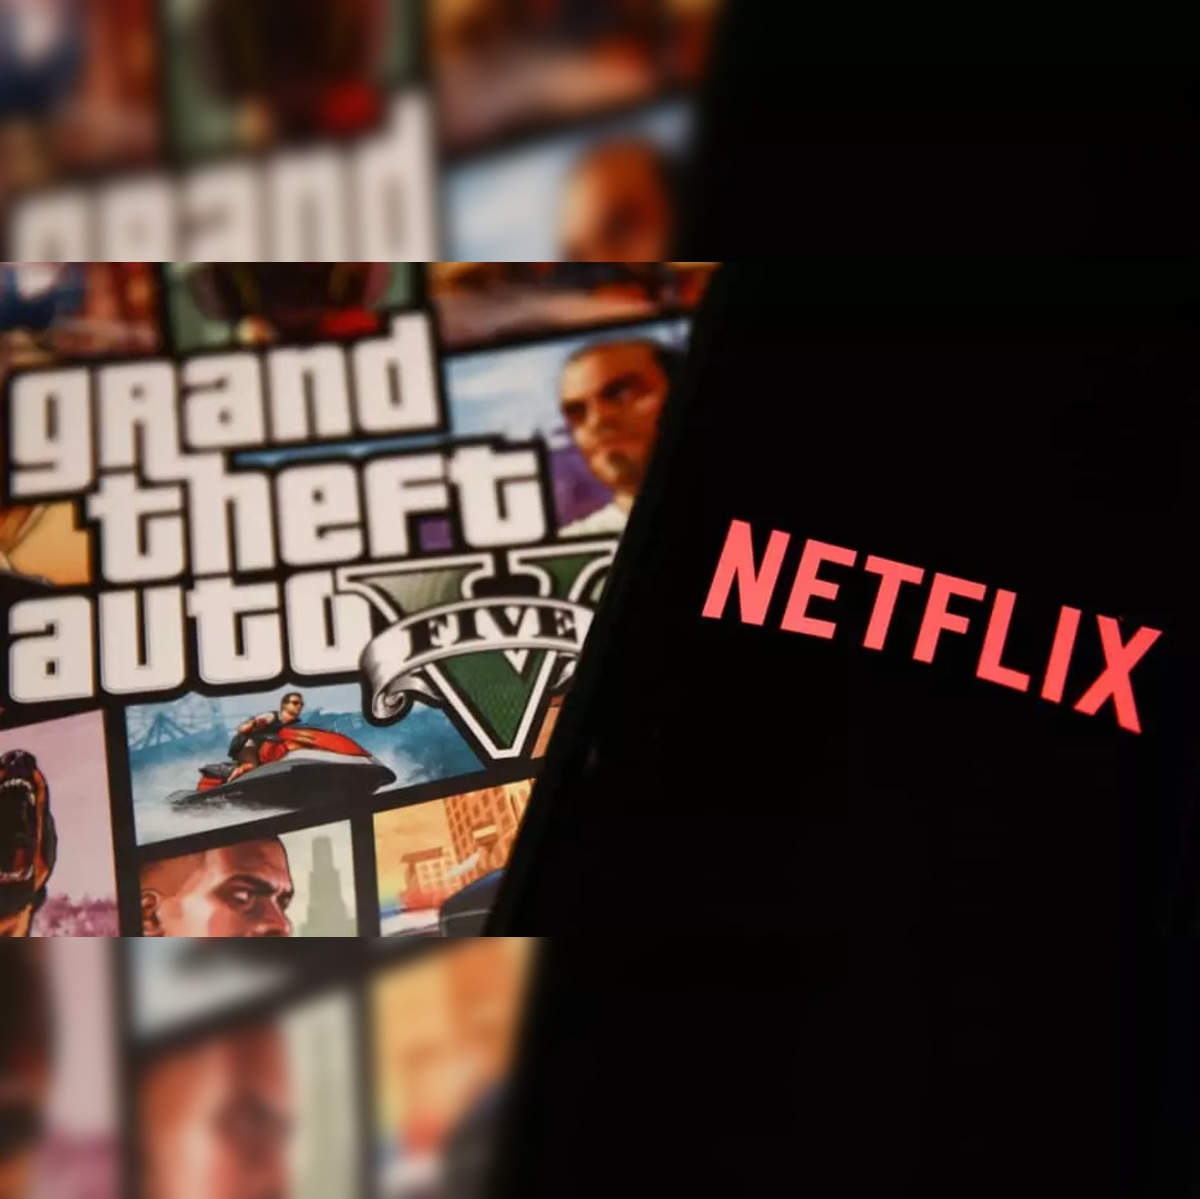 GTA III definitive edition Netflix is here gameplay/GTA 3 definitive Play  Store Android Full Detail 